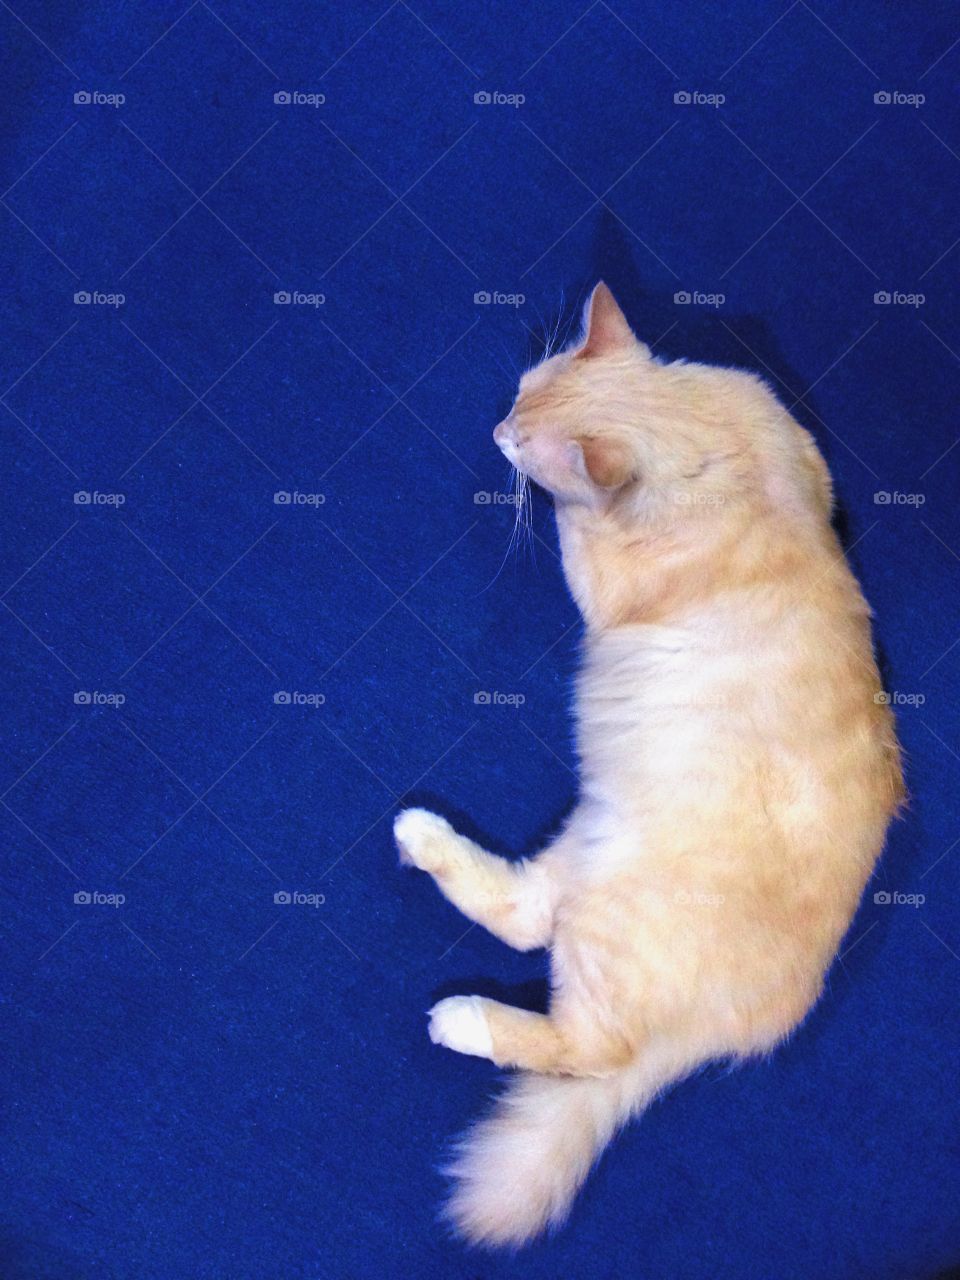 My cat is one the blie carpet.
 